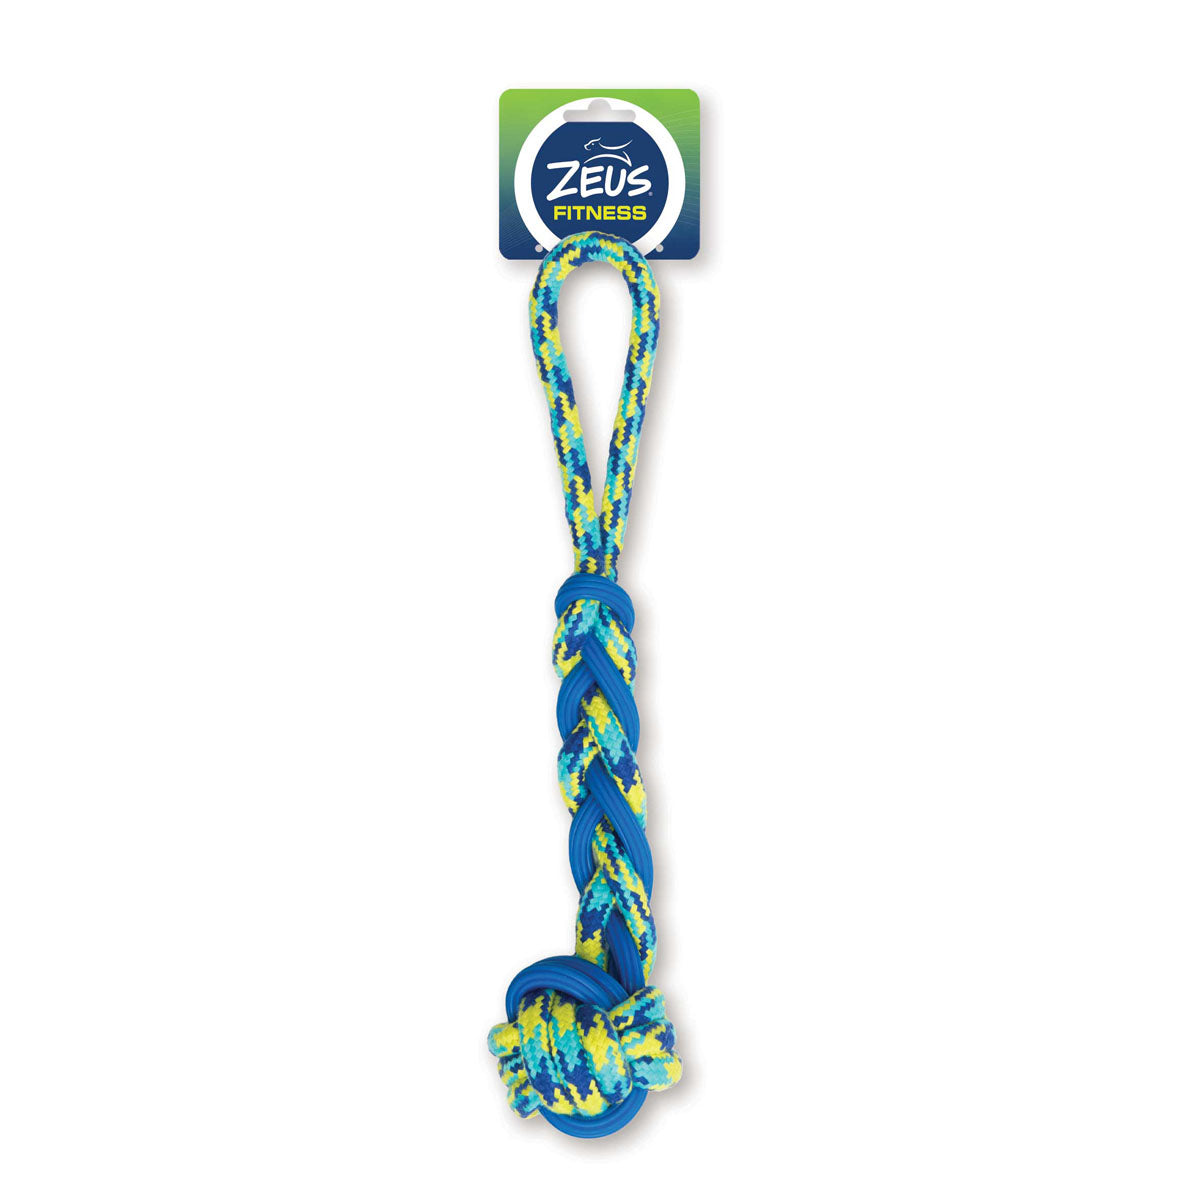 Zeus Fitness Dog Toys Rope and TPR Ball Tug 41cm